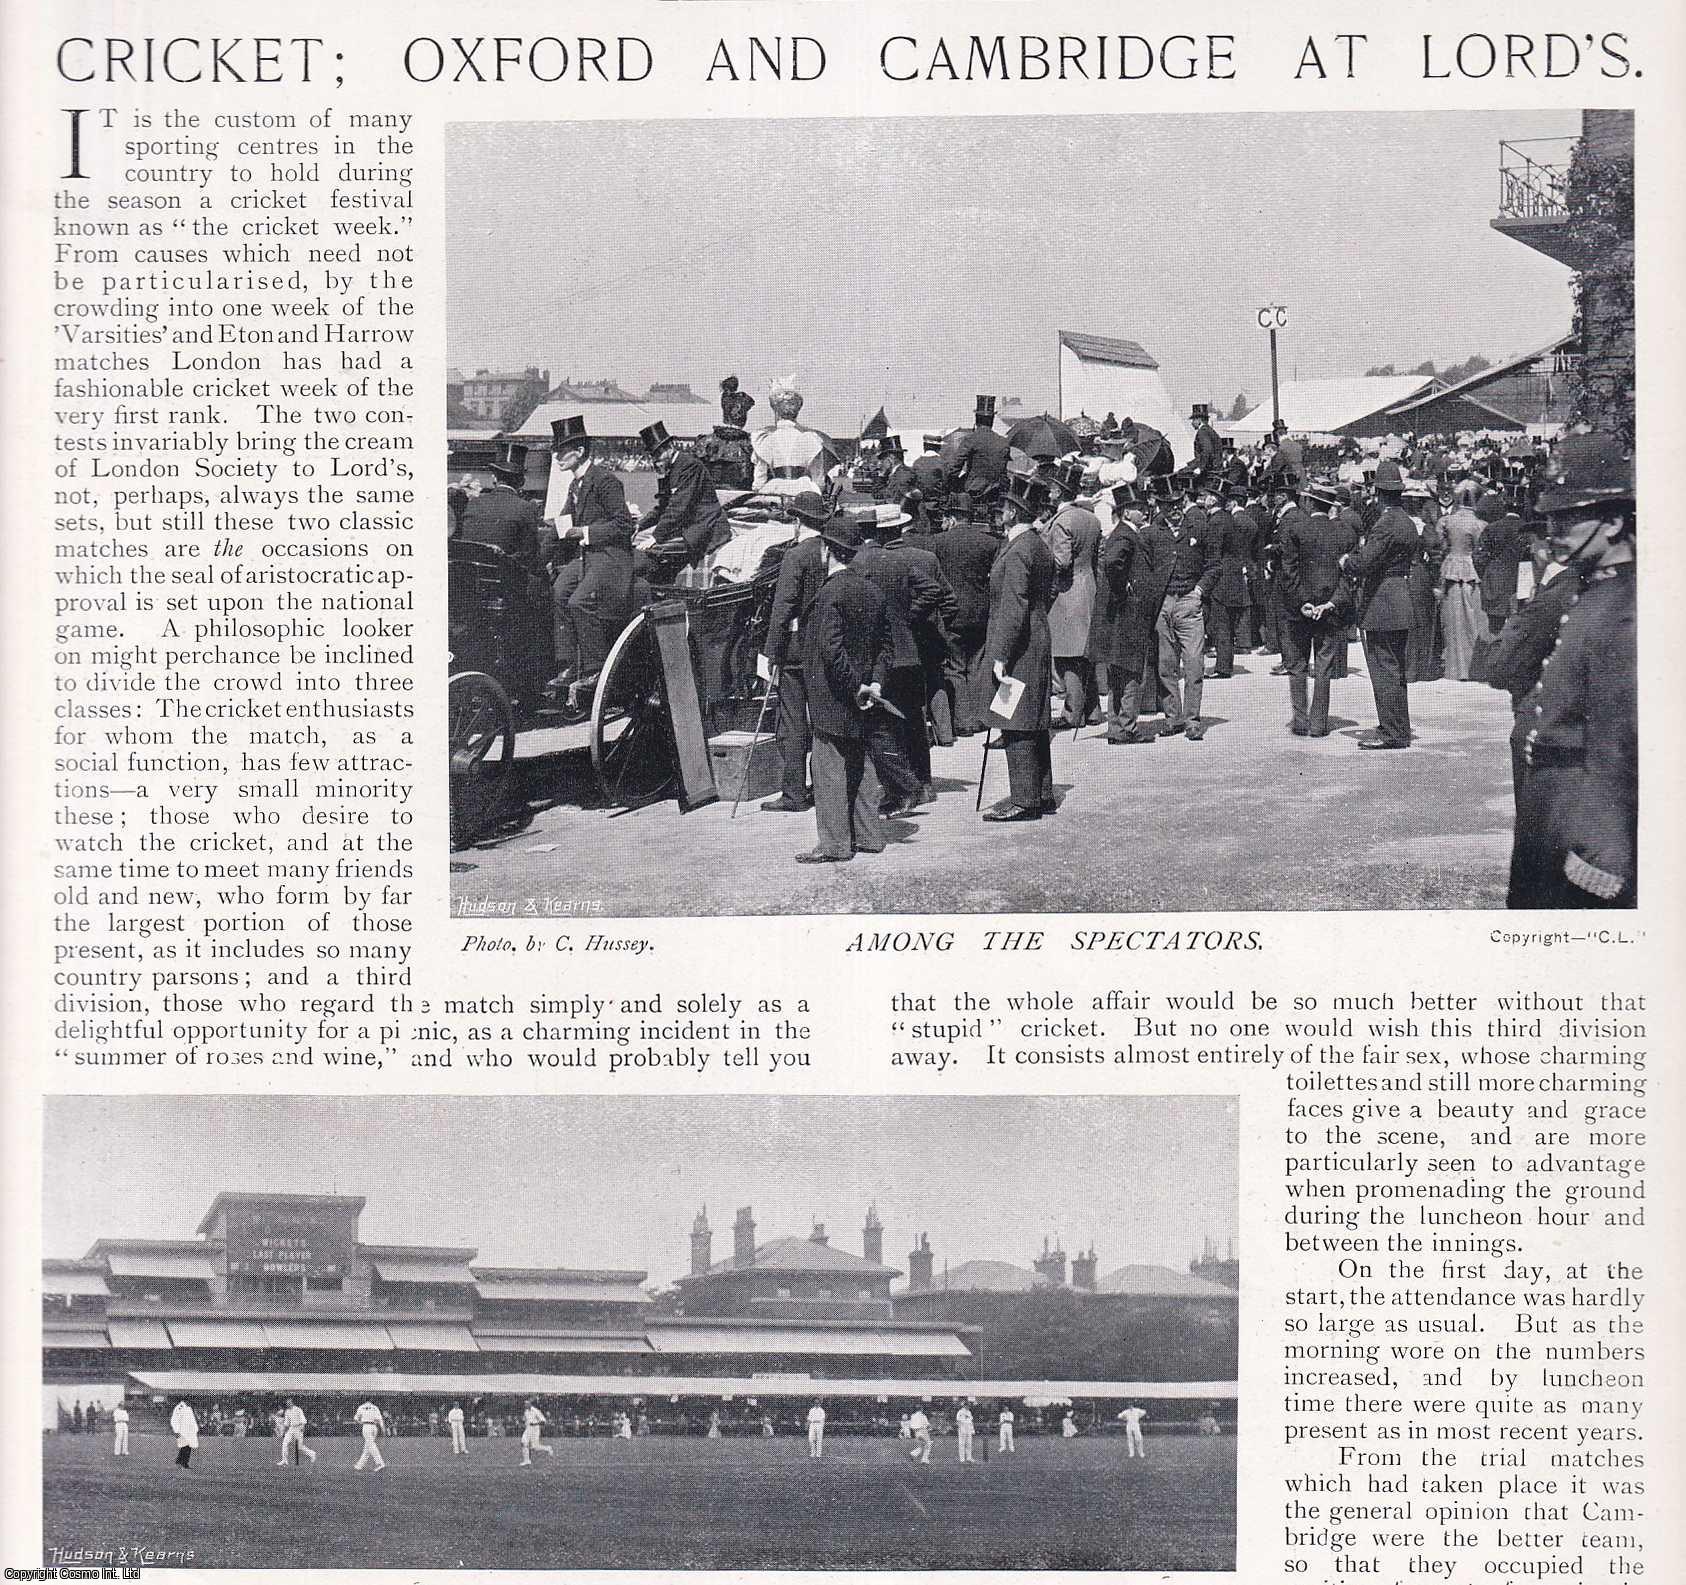 COUNTRY LIFE - Cricket: Oxford and Cambridge at Lords. Several pictures and accompanying text, removed from an original issue of Country Life Magazine, 1897.